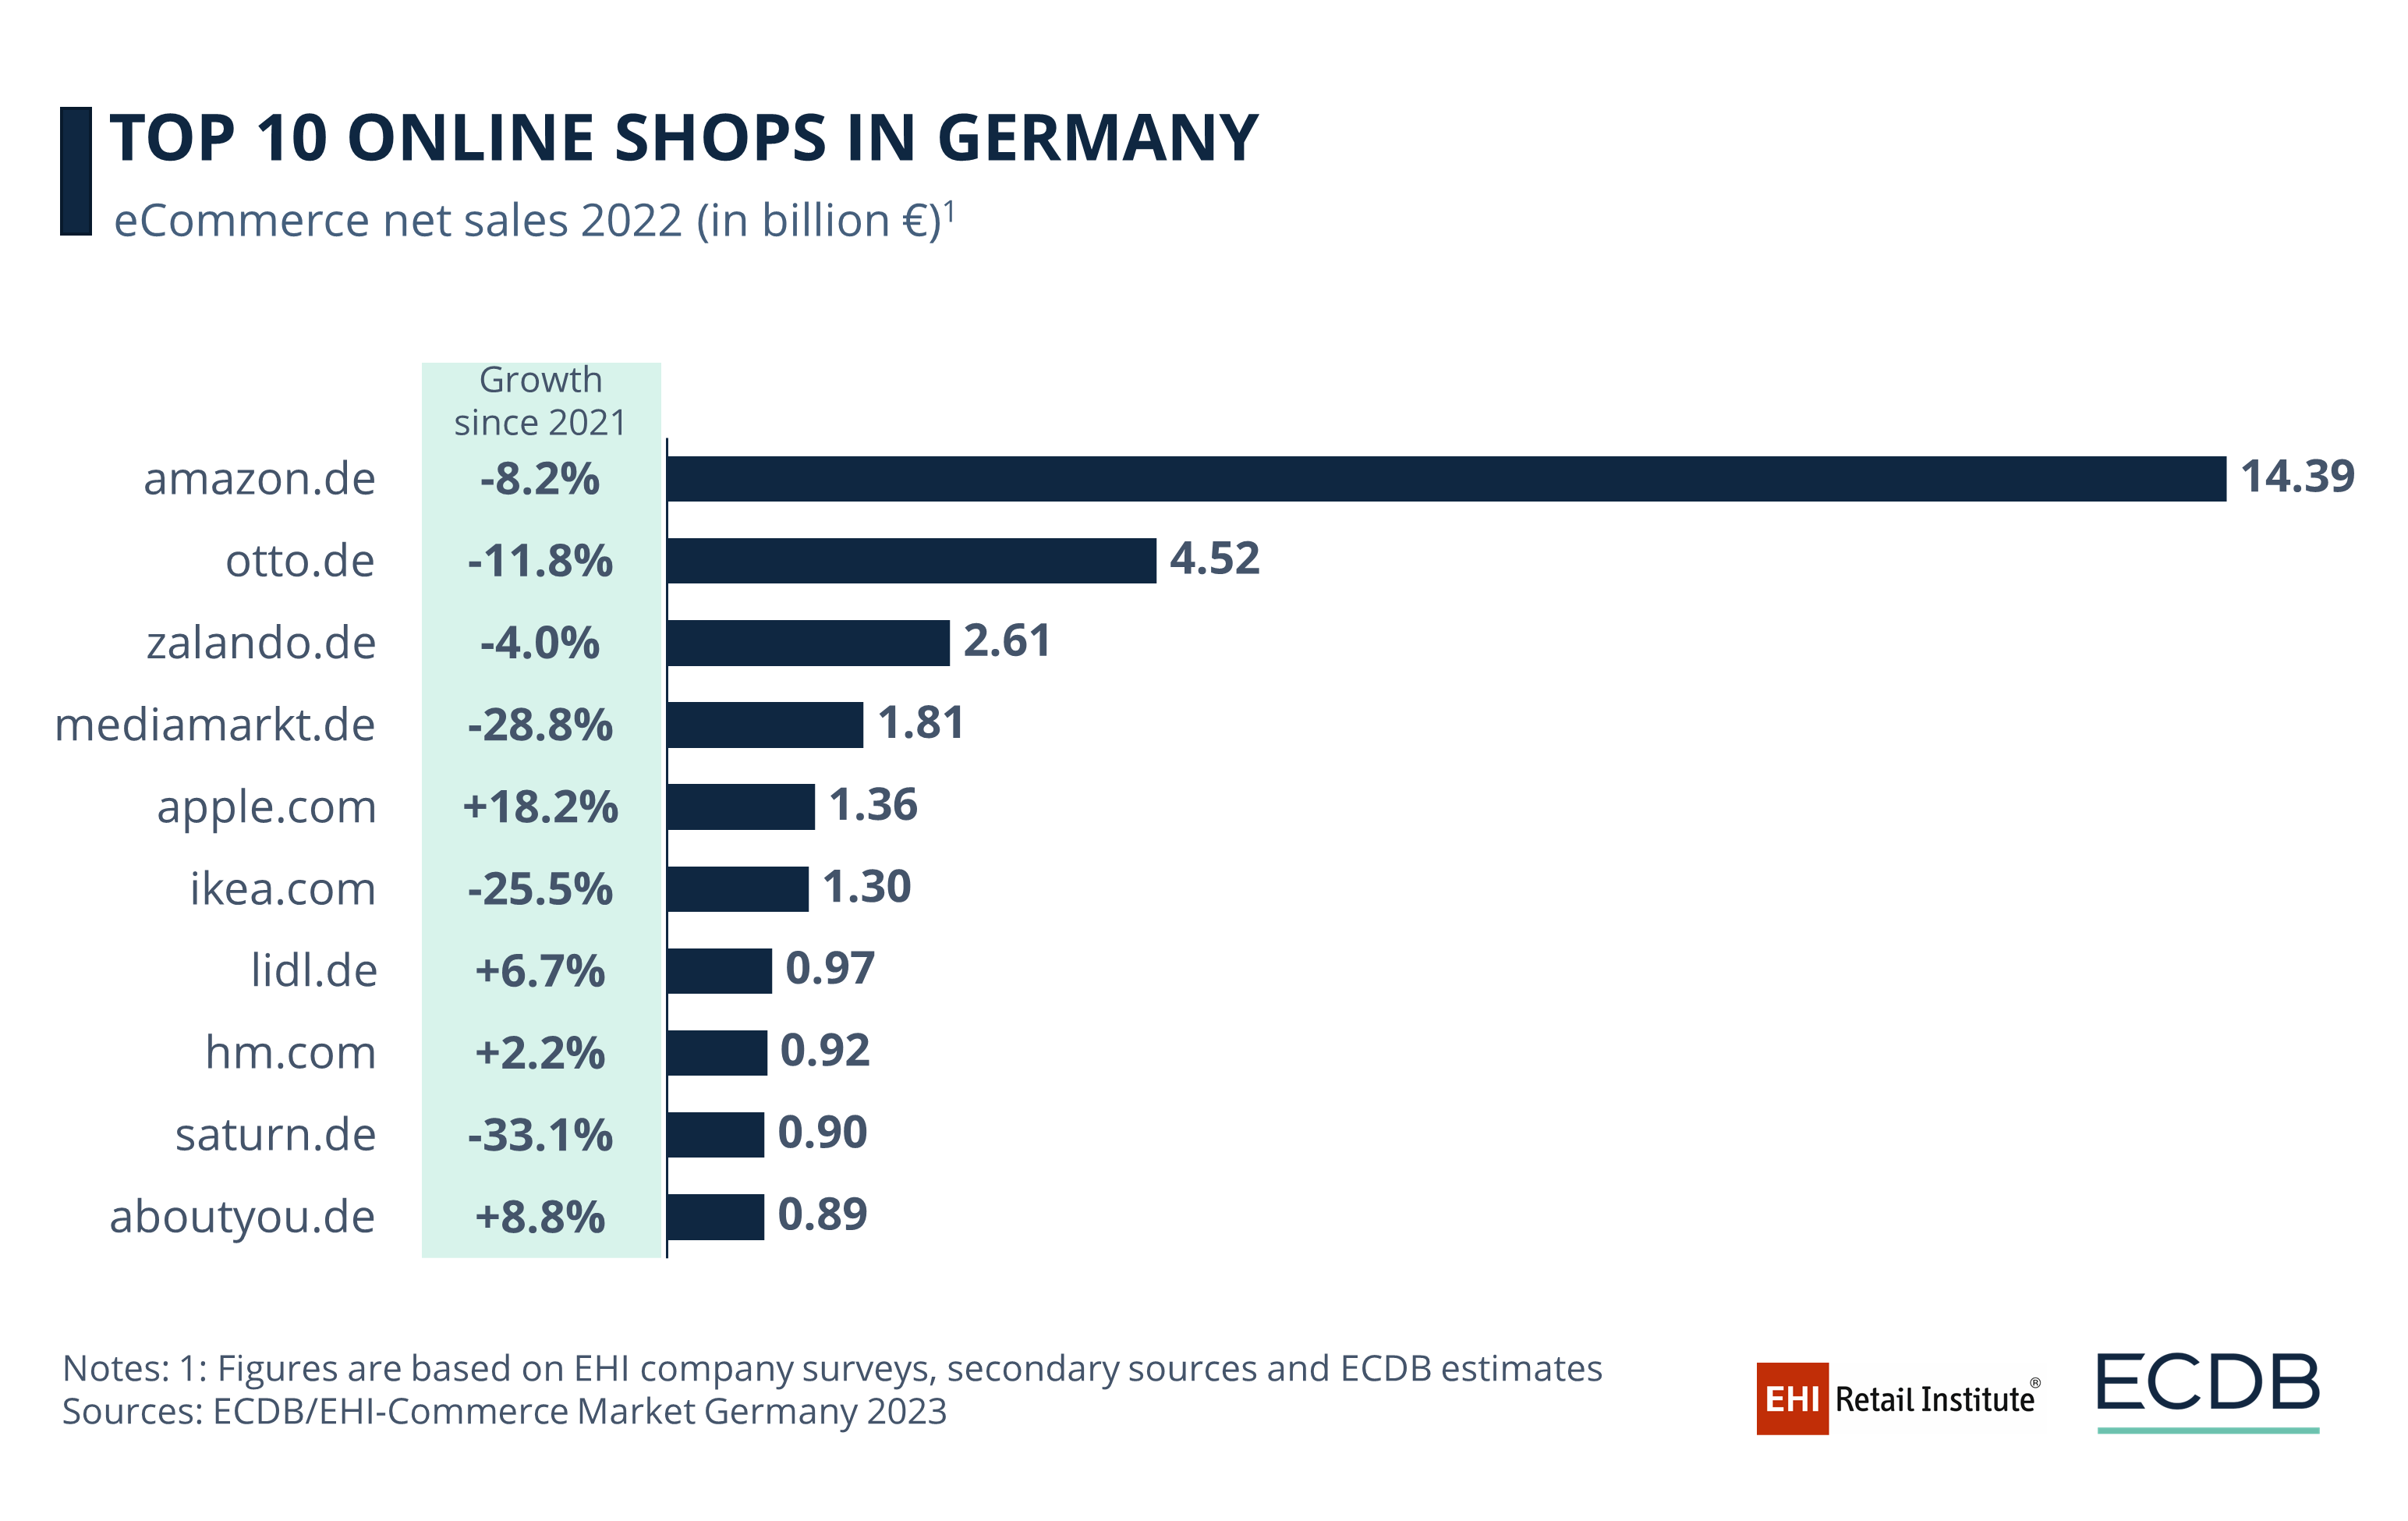 E-Commerce Market Germany 2023 – The Top 10 Online Stores in 2022